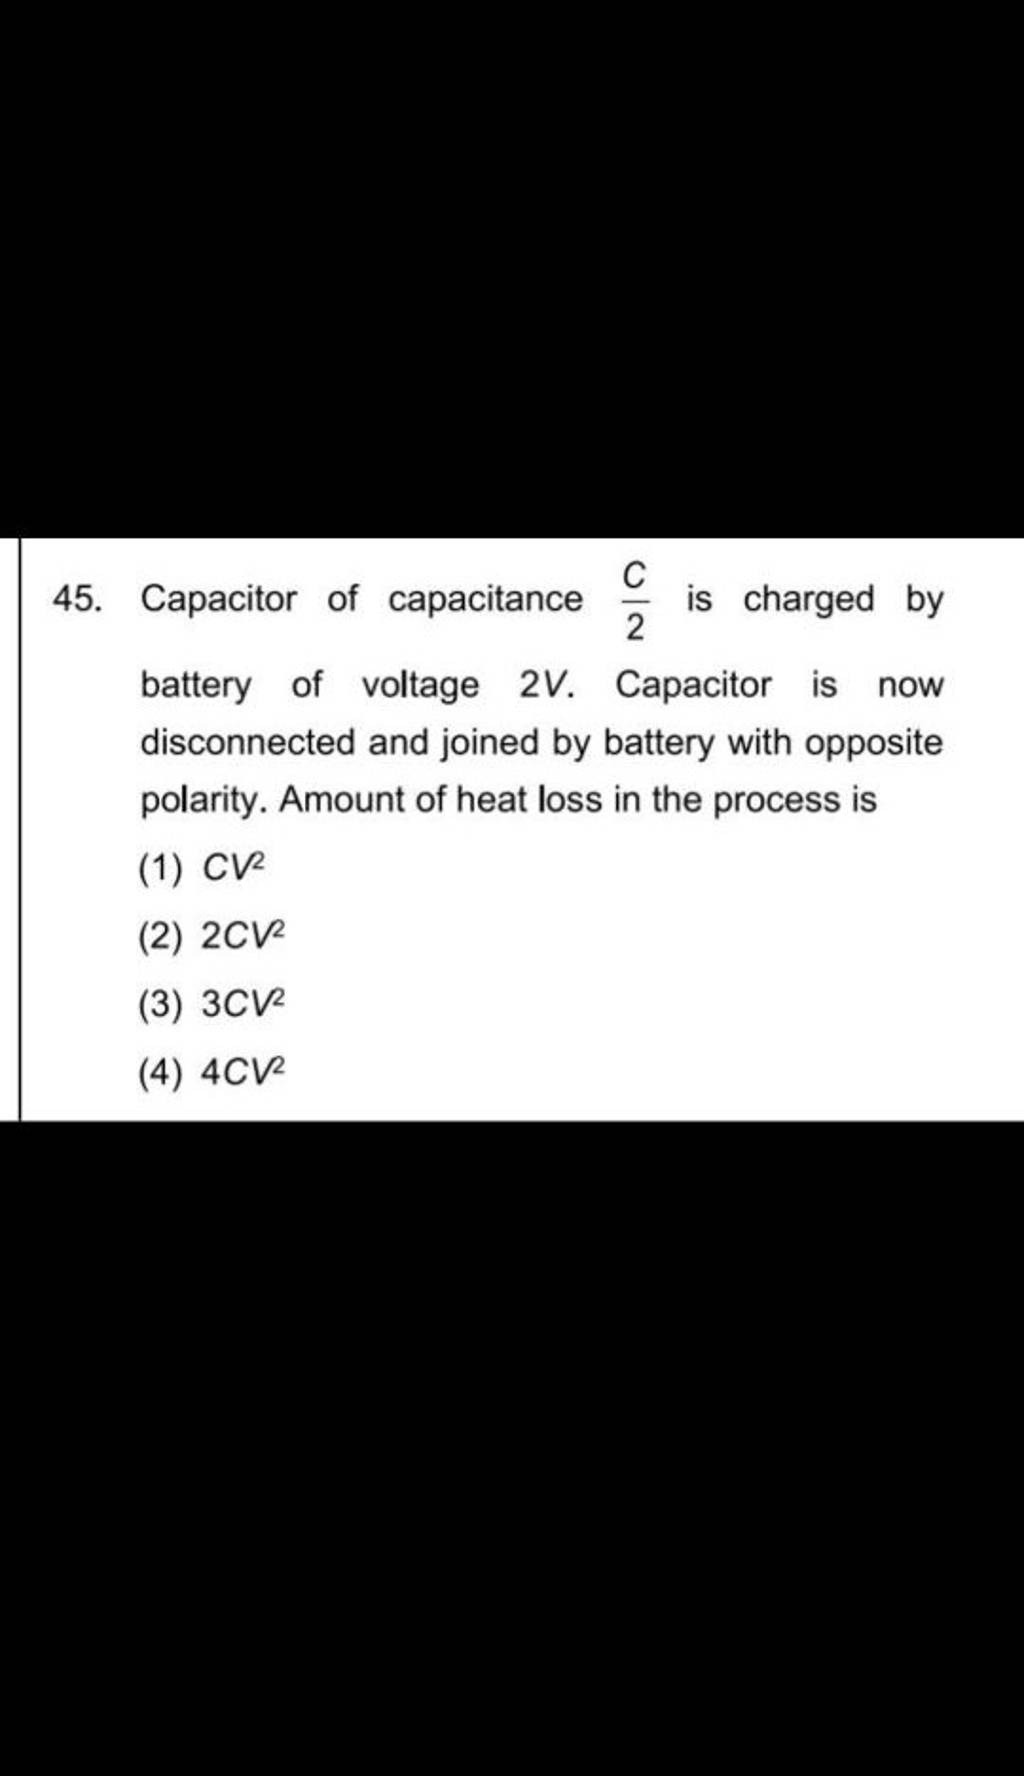 Capacitor of capacitance 2C​ is charged by battery of voltage 2V. Capa